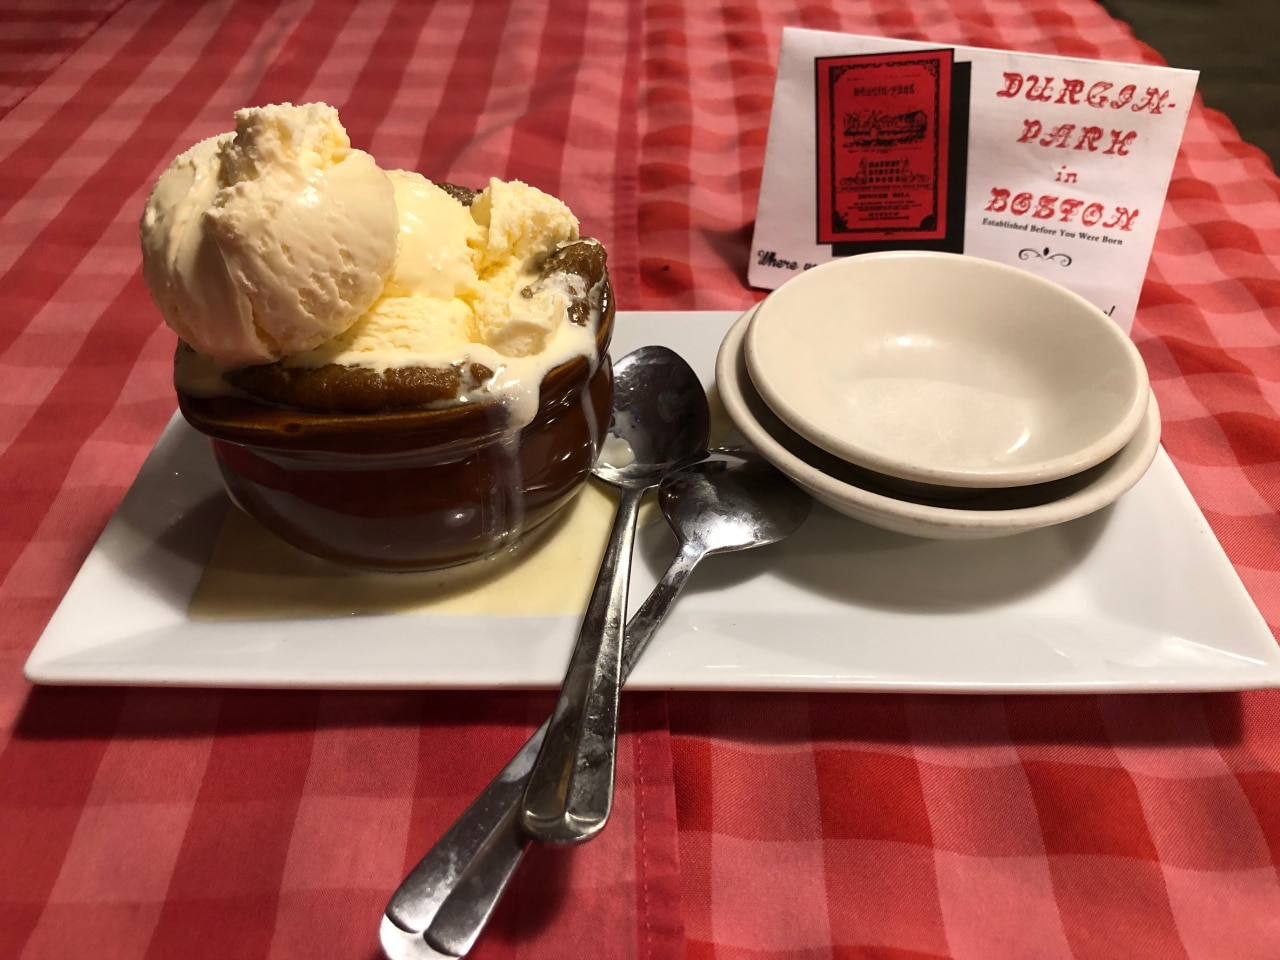 durgin-park-closing-indian-pudding-jtremaine